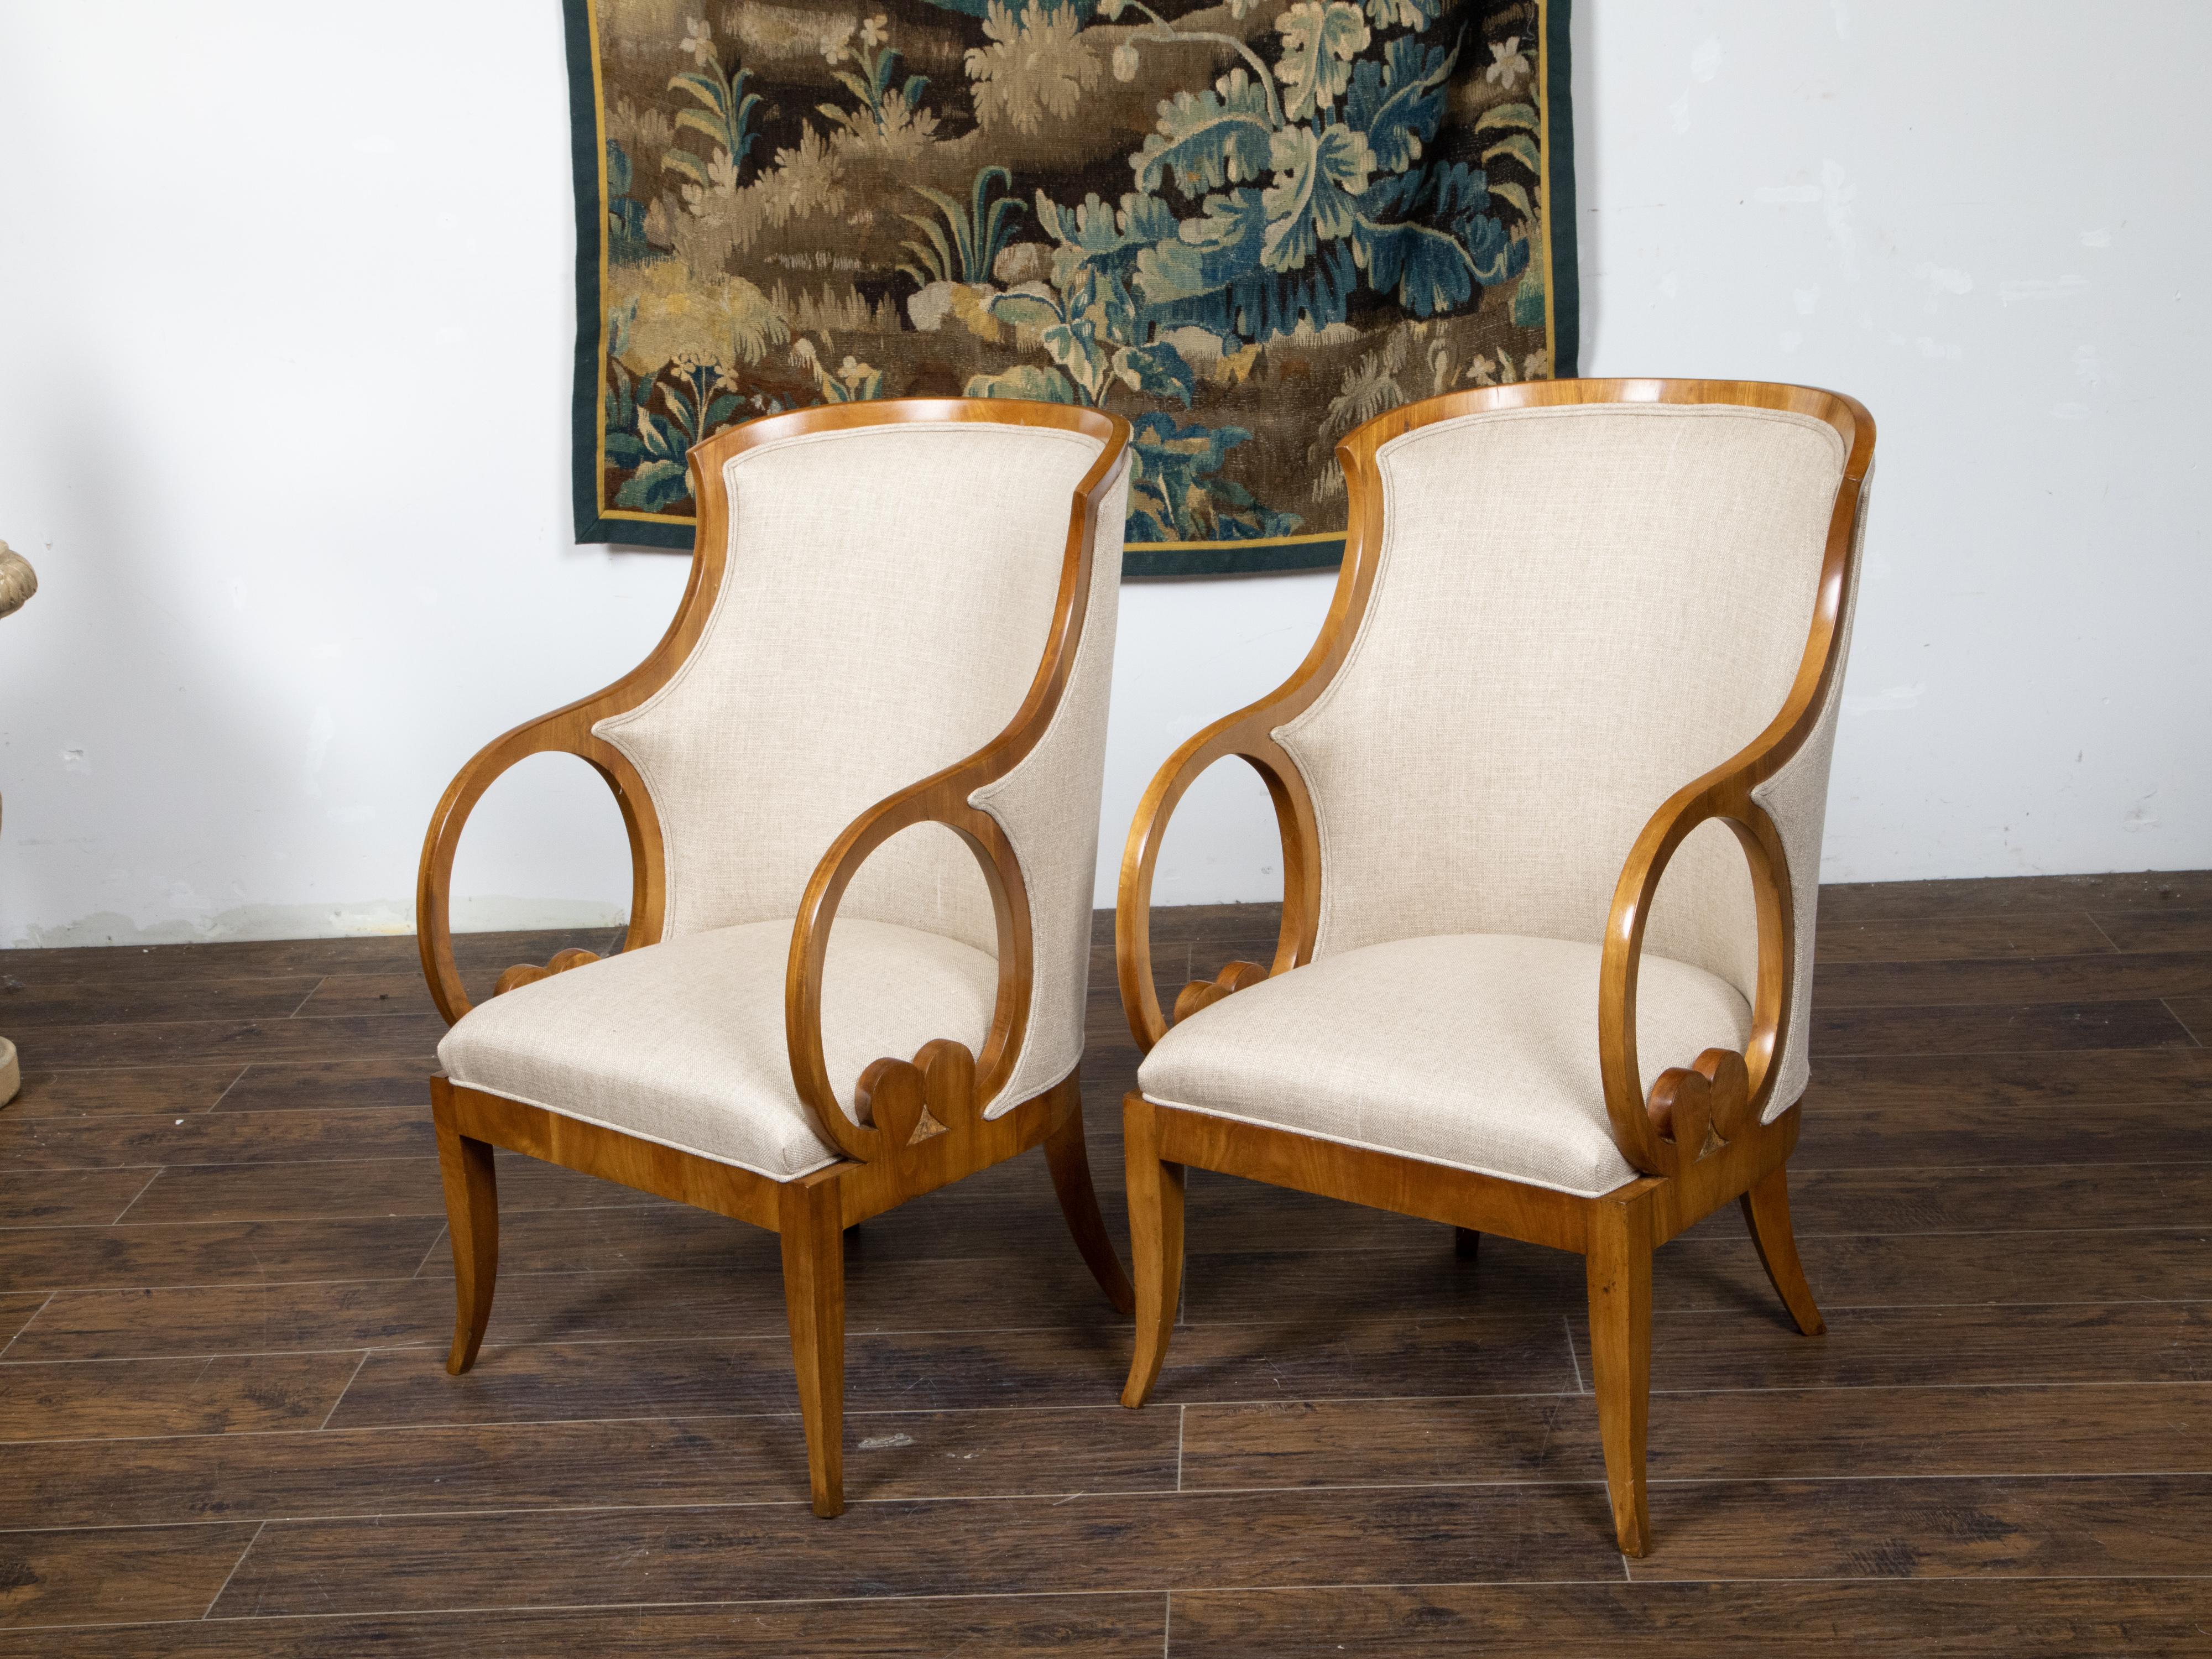 Carved Pair of Austrian Biedermeier Period 19th Century Walnut Armchairs with Loop Arms For Sale